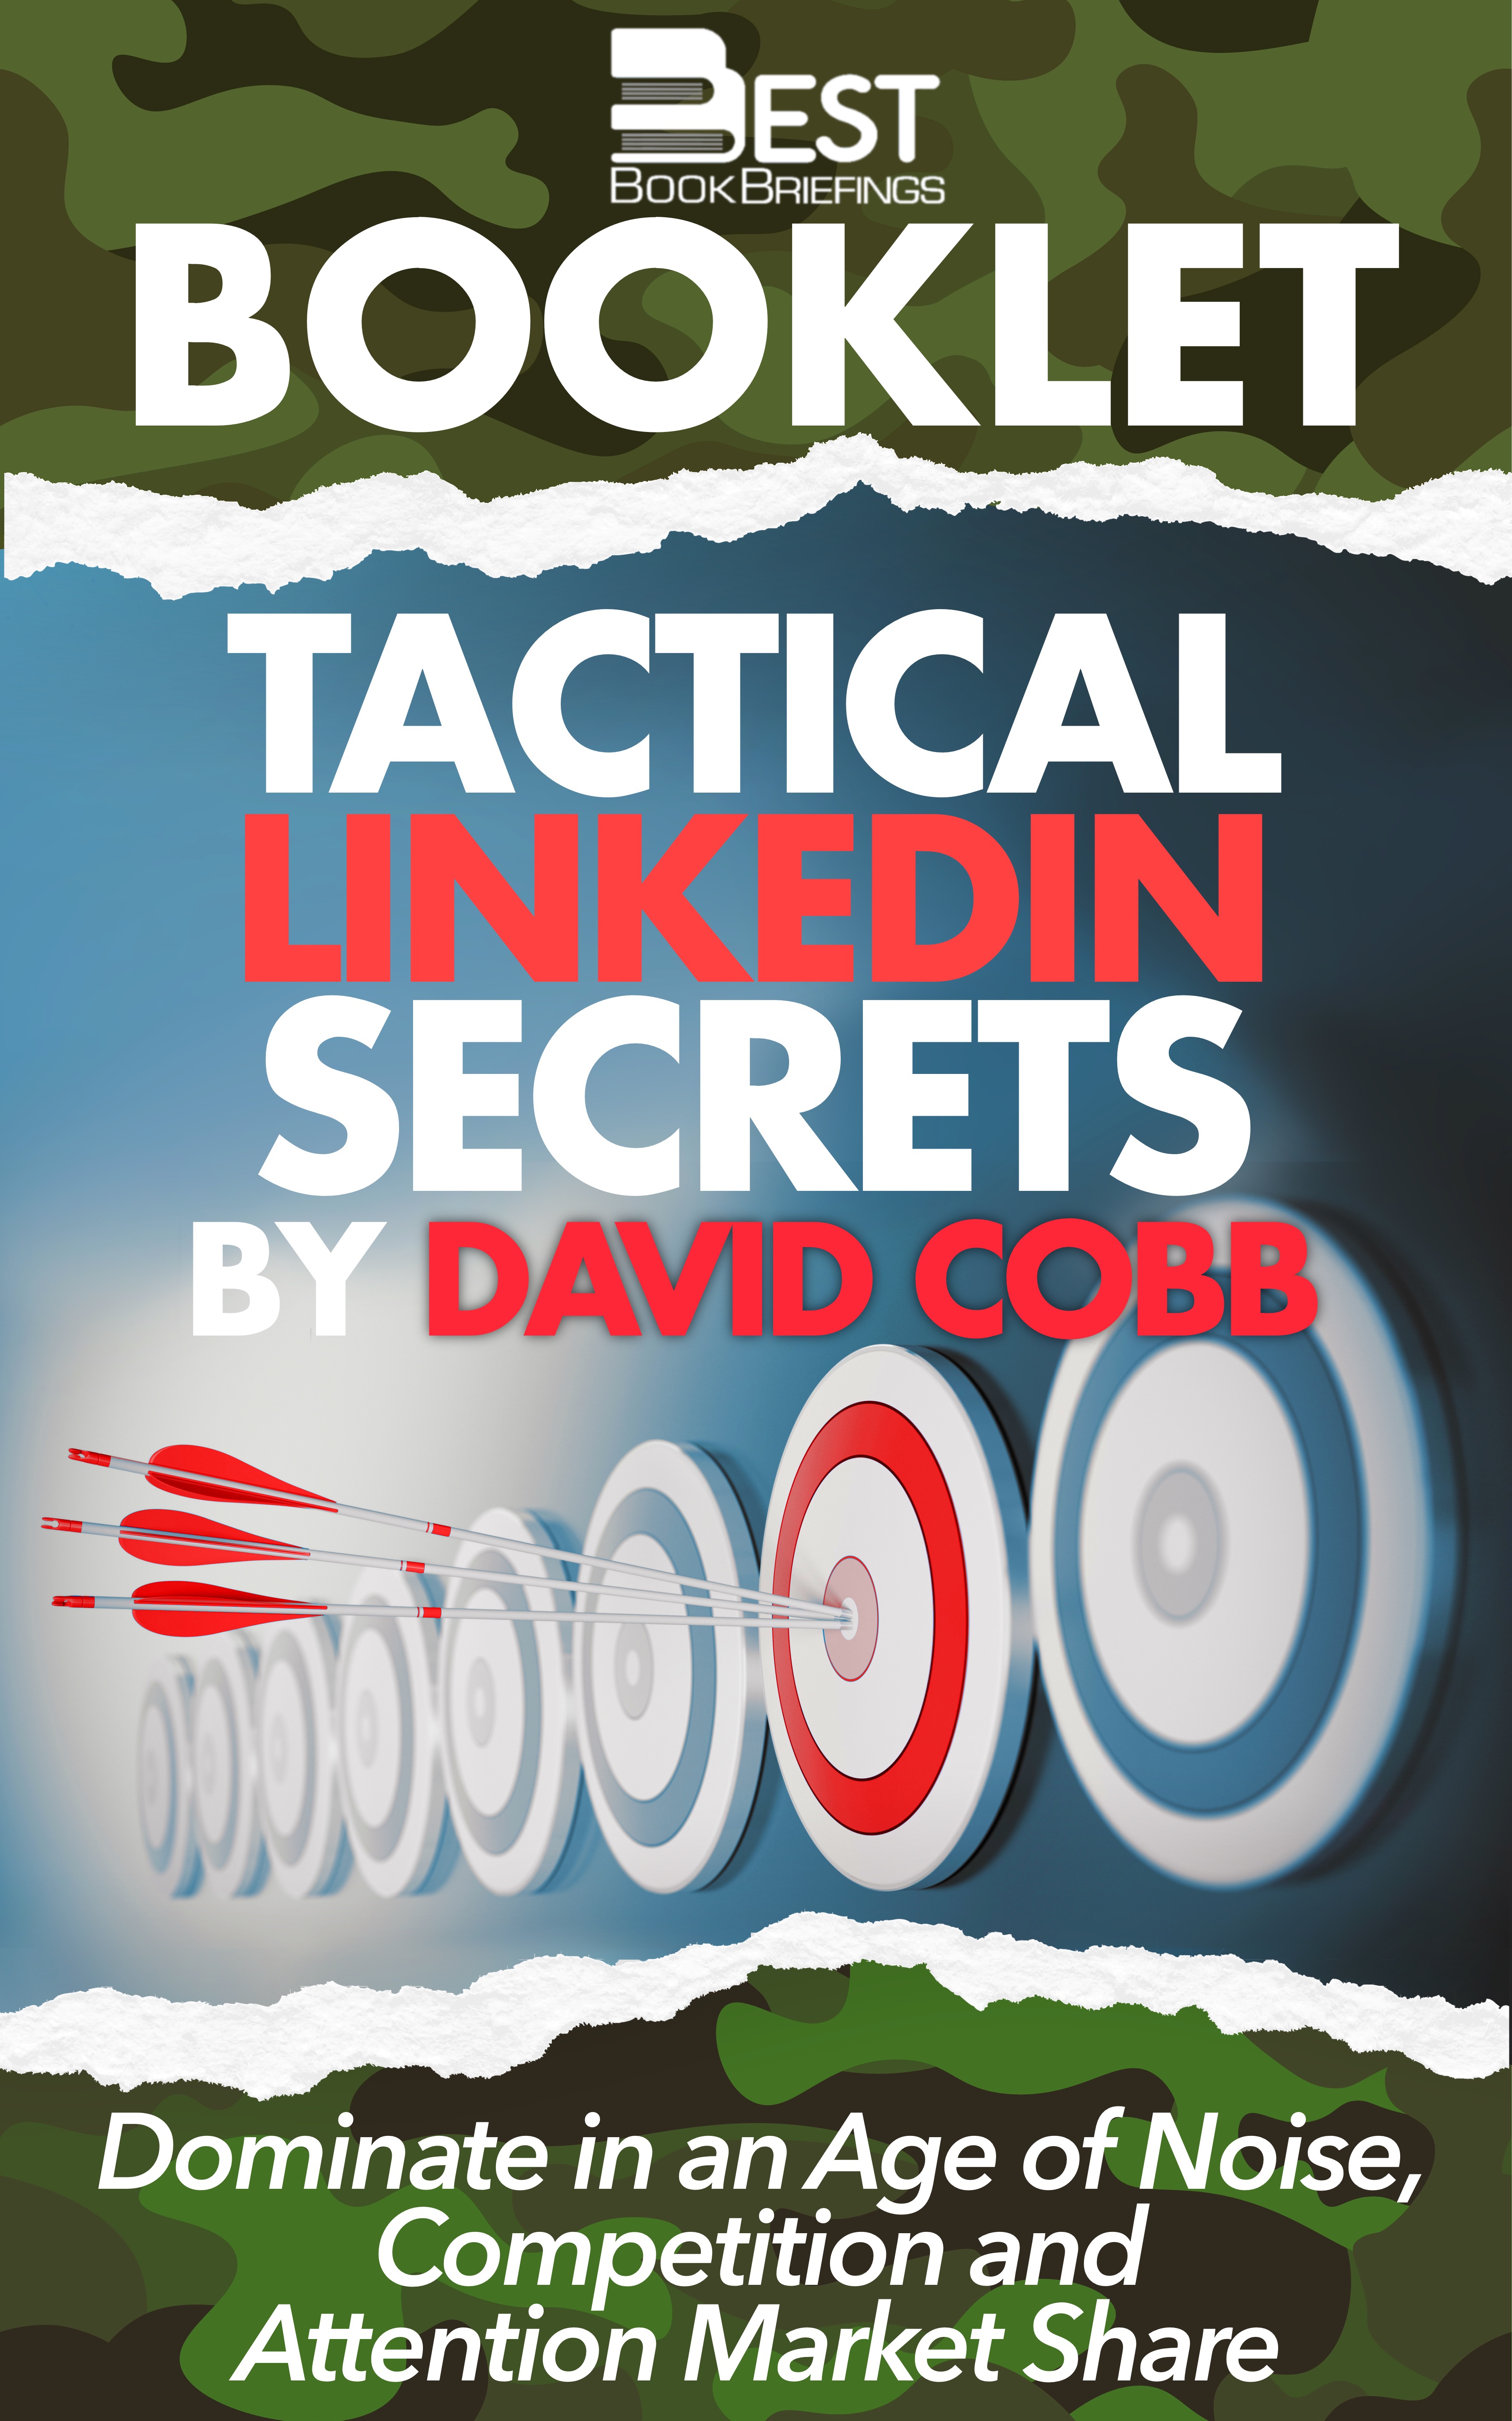 Tactical LinkedIn Secrets will teach you to stand out and gain competitive dominance in your marketing place. The advice and knowledge provided will prepare you with what I coin as, “arrows for your digital quiver.” Your quiver is an assemblage of tools for you to apply and optimize.   